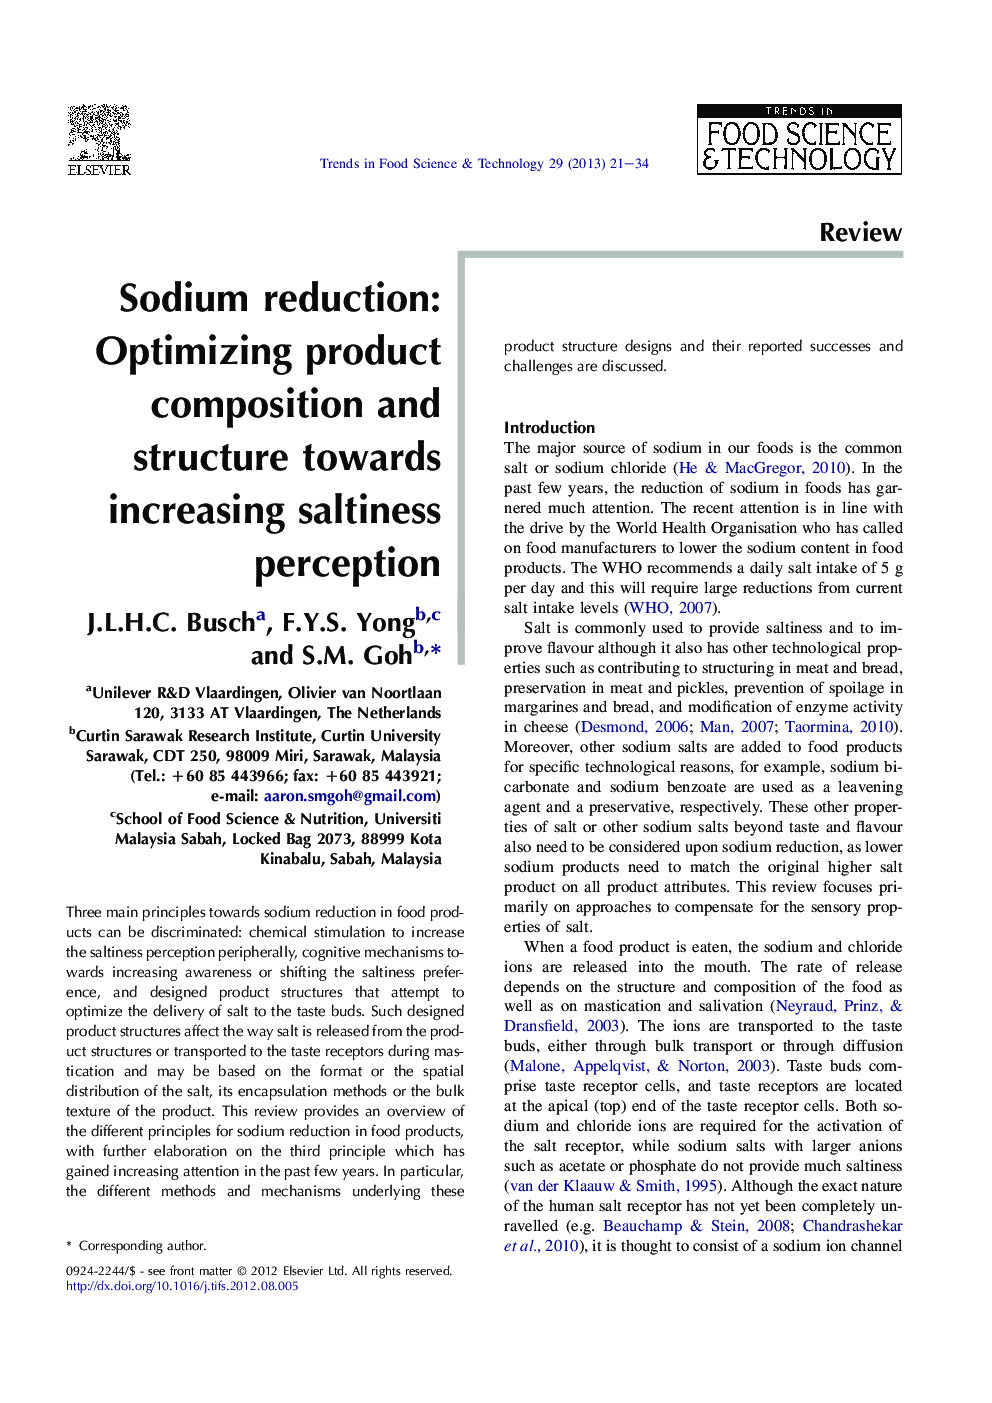 Sodium reduction: Optimizing product composition and structure towards increasing saltiness perception